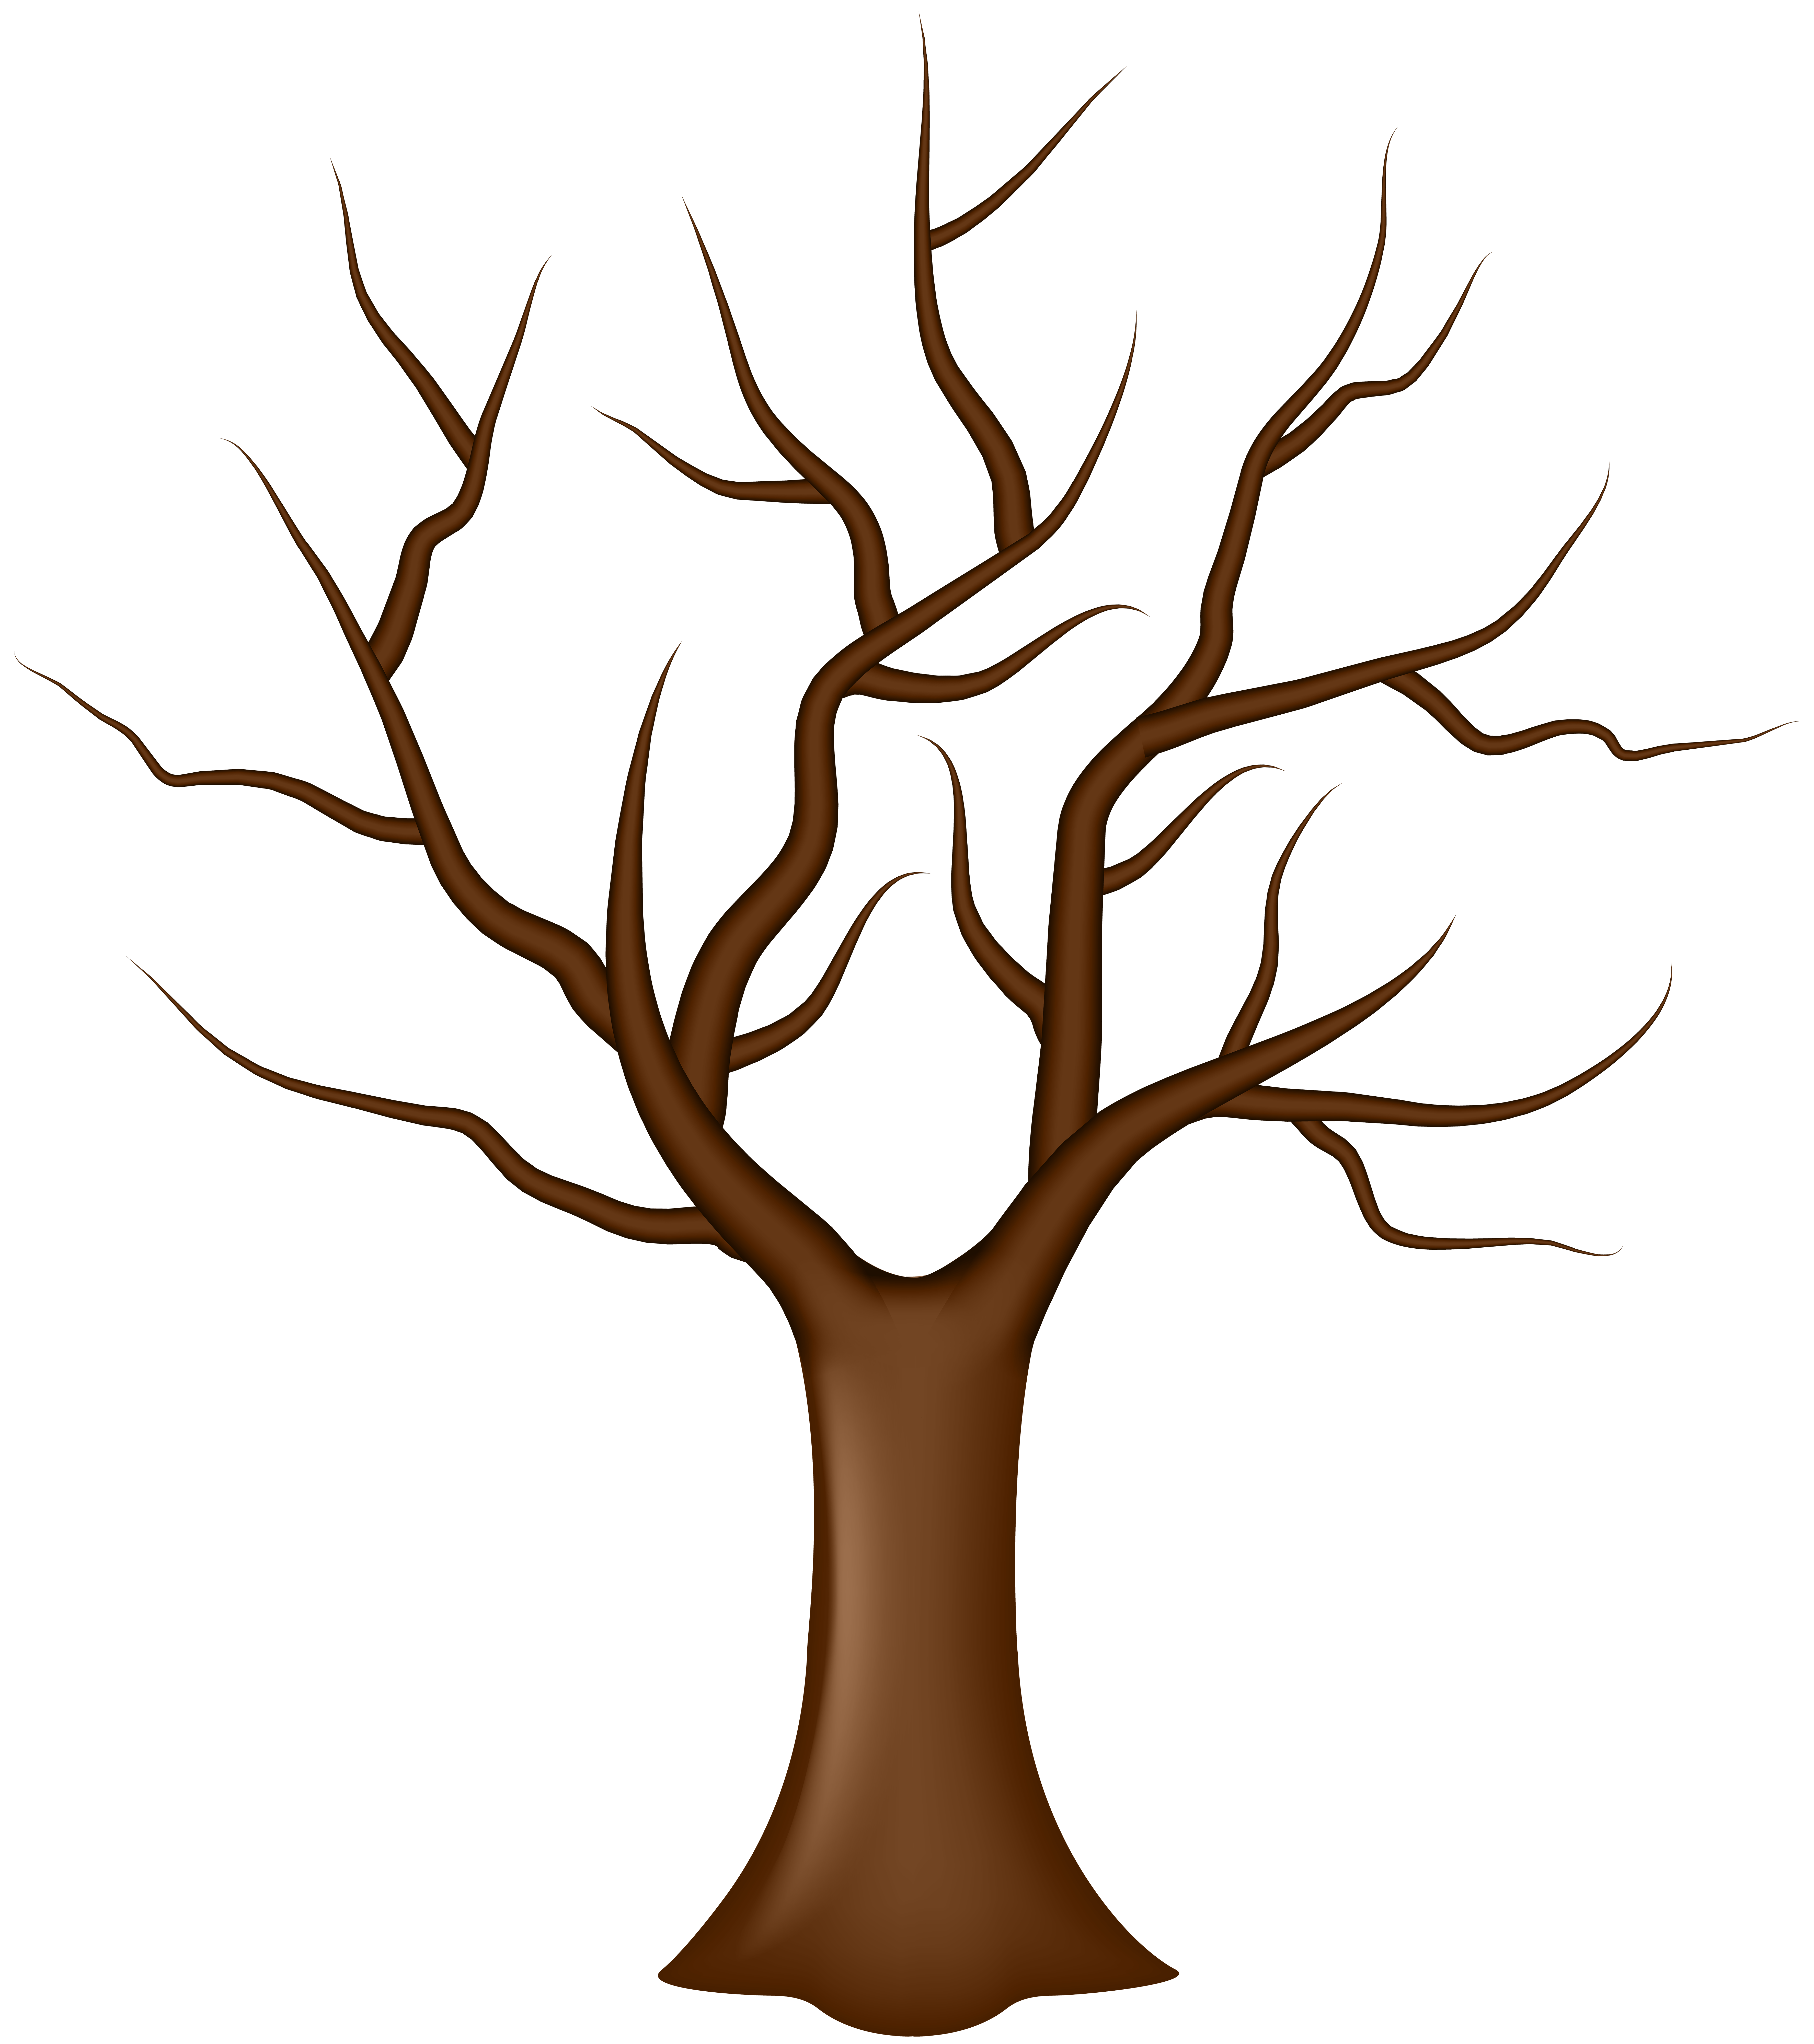 kisspng-tree-of-40-fruit-leaf-clip-art-family-tree-5abece8f2fa477.9414847215224541591952.png